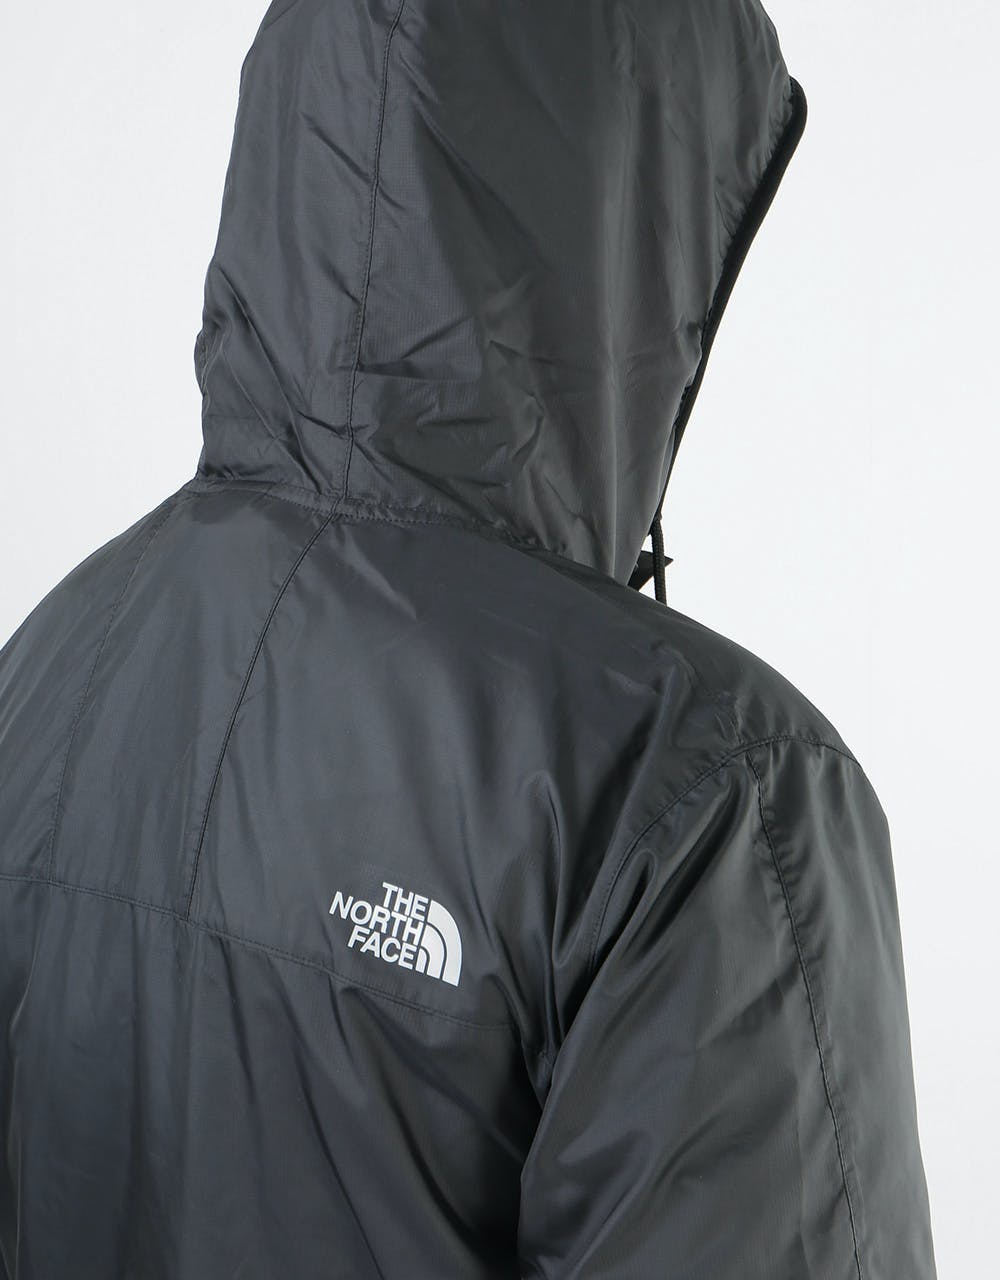 The North Face 1985 Mountain Jacket - TNF Black/High Rise Grey